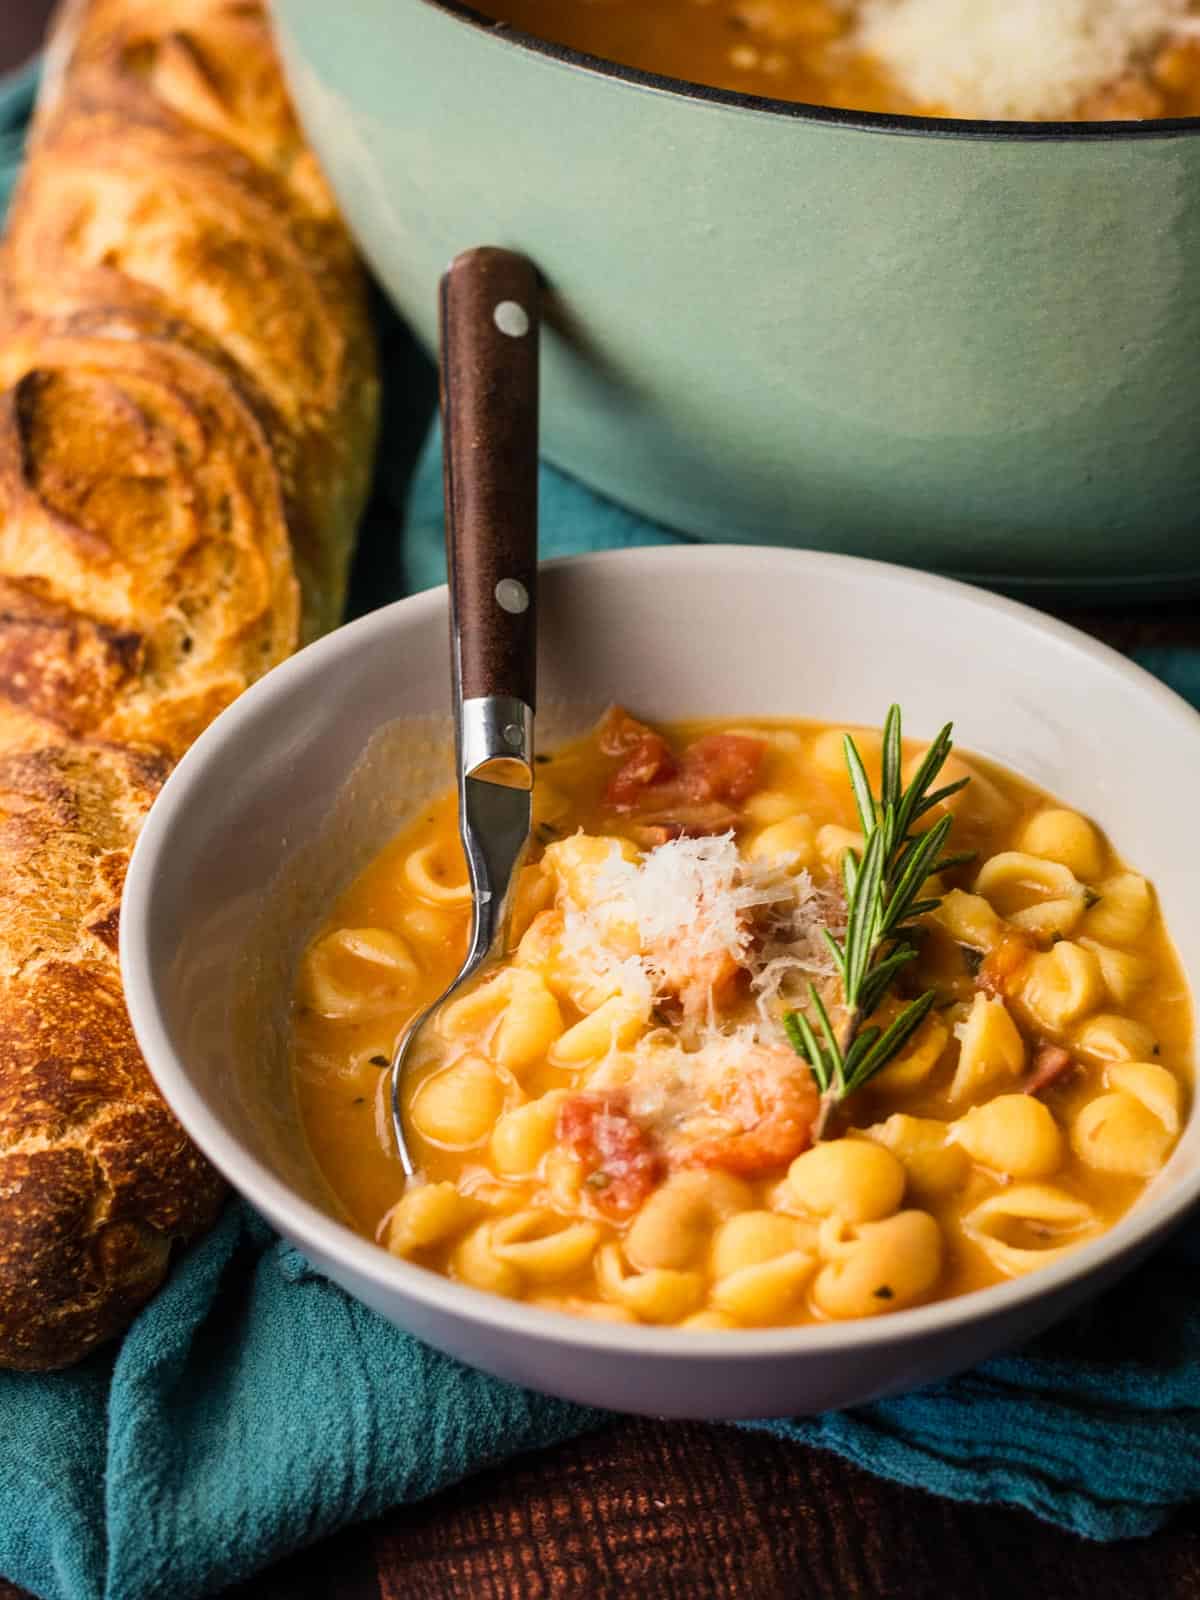 bowl of pasta fagioli with a spoon in it and rosemary and freshly grated cheese on top.